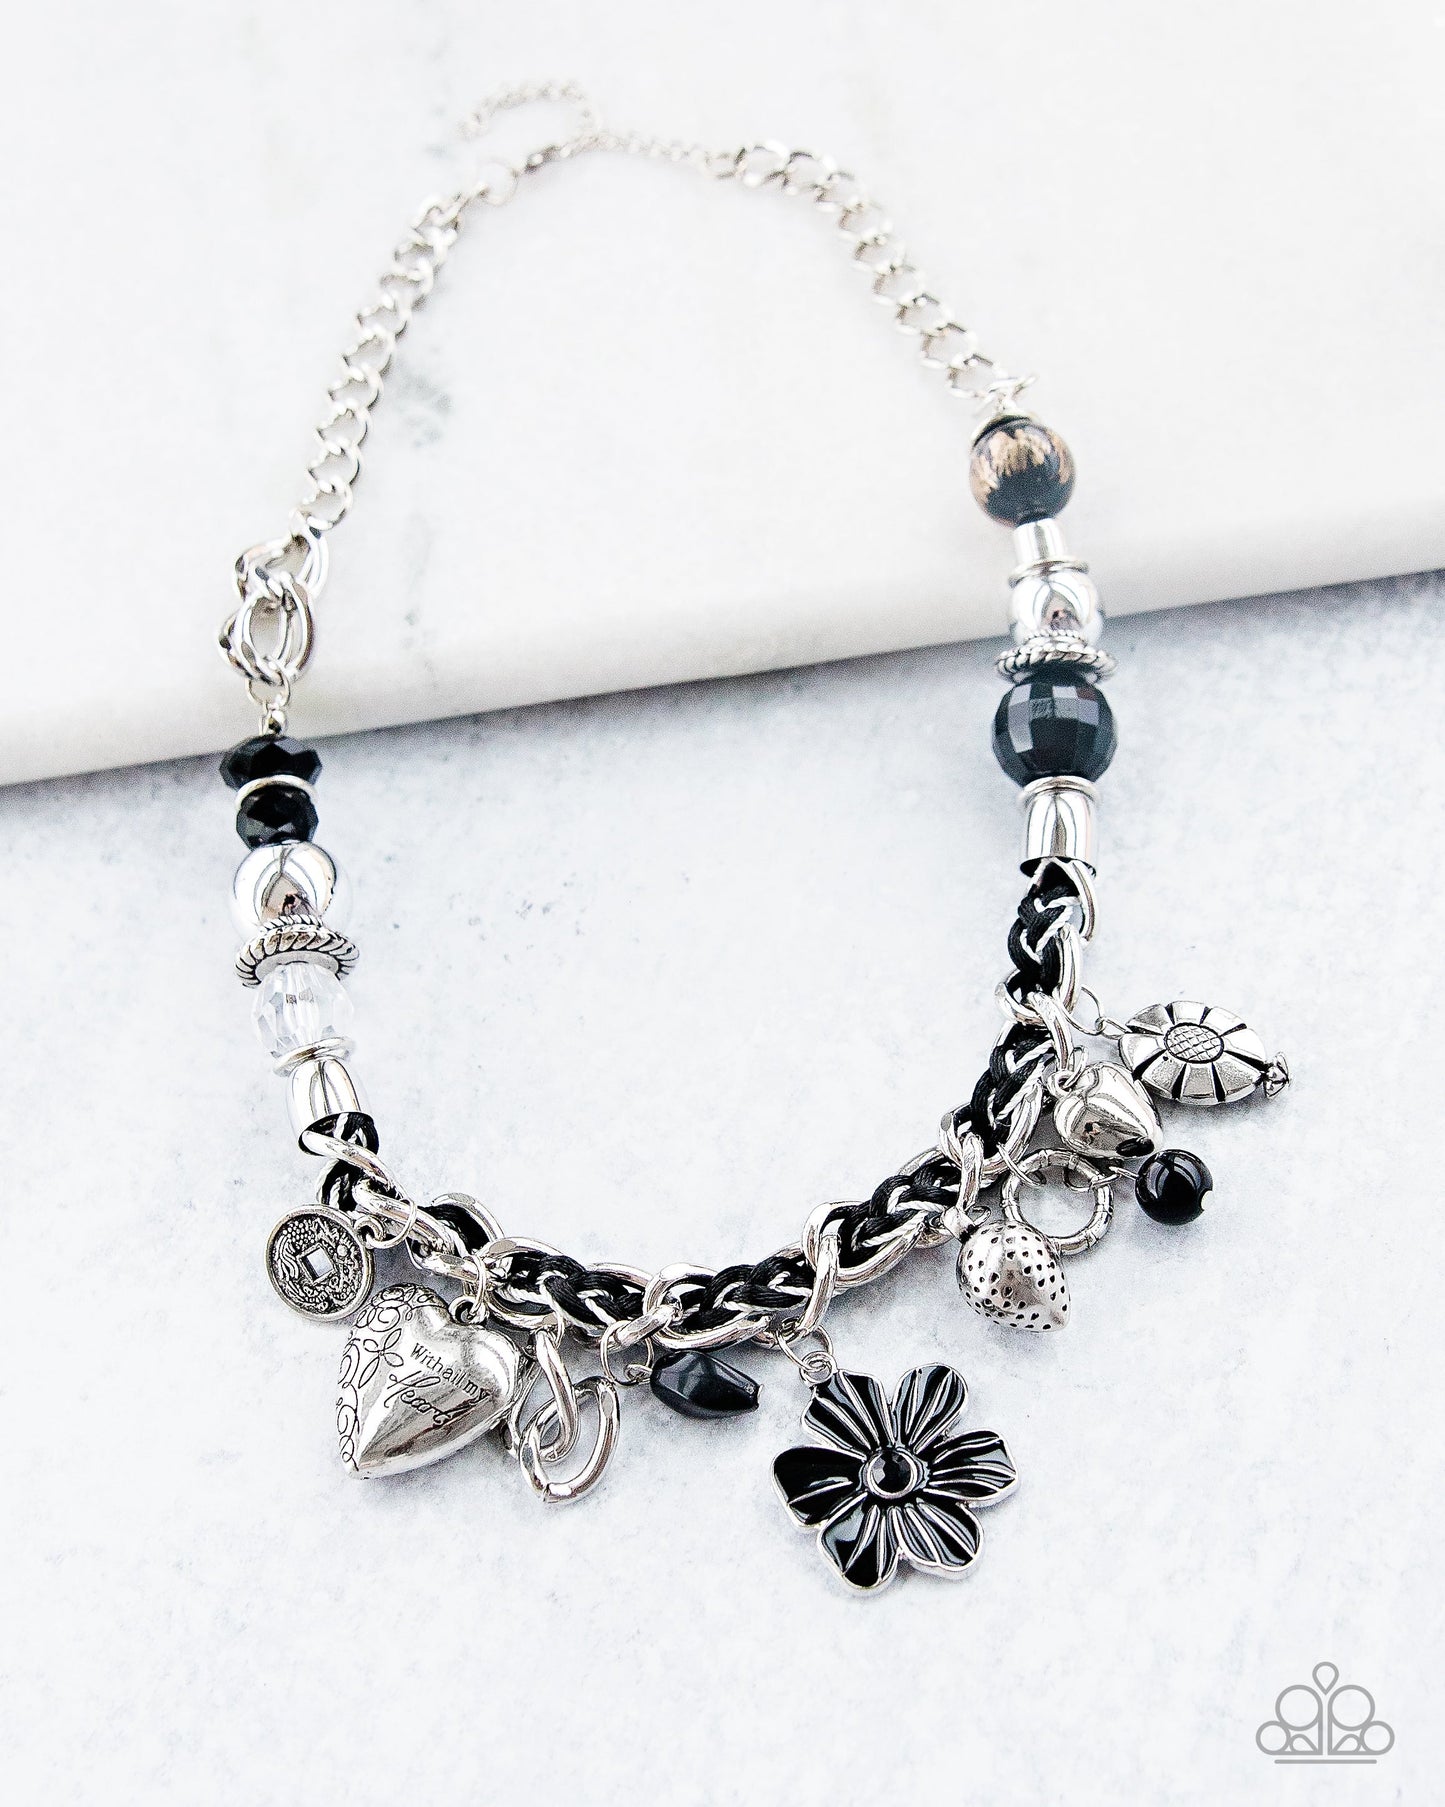 Charmed, I Am Sure - Black and Silver Necklace - Paparazzi Accessories - Black and ivory cording is braided through a chunky silver chain. A unique variety of charms decorate the piece including a delicate flower and a heart. Heart is inscribed with the phrase "With All My Heart"on one side and a short bible verse on the other that reads, "Love the Lord thy God with all your heart. Luke 10:27." Features an adjustable clasp closure. Bejeweled Accessories By Kristie